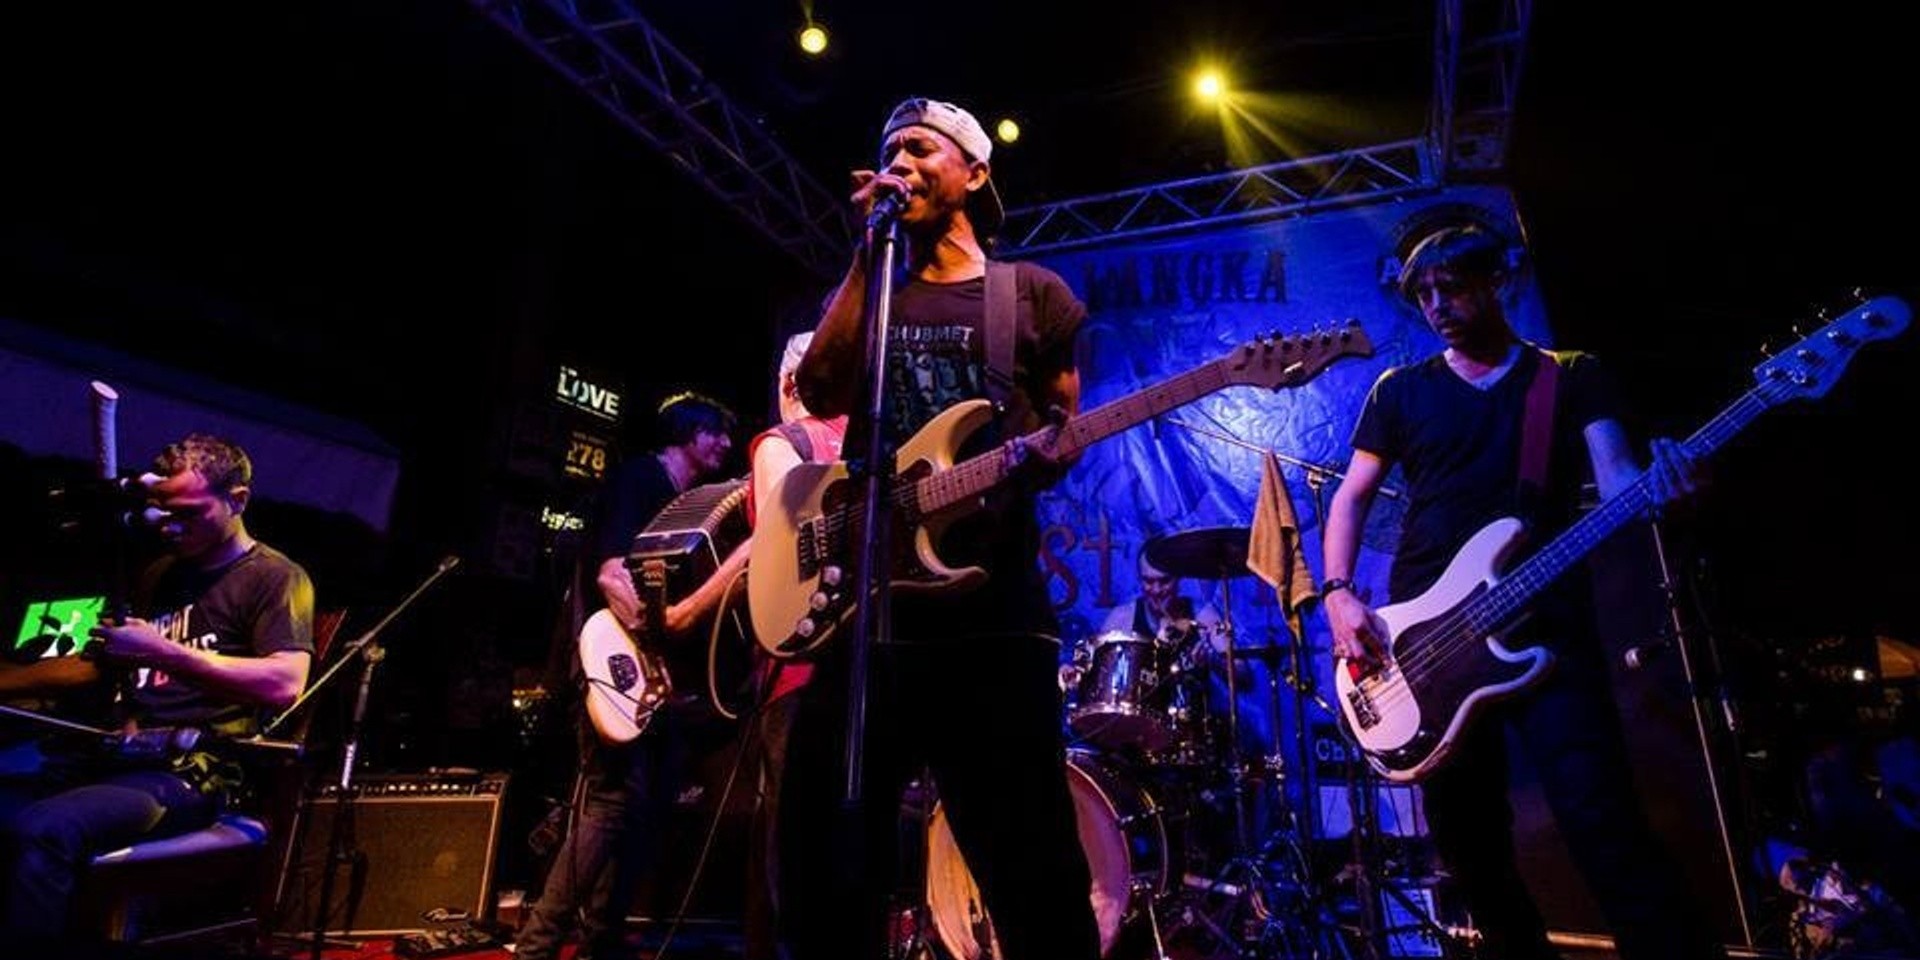 Cambodian rock band Kampot Playboys to perform in Singapore this weekend